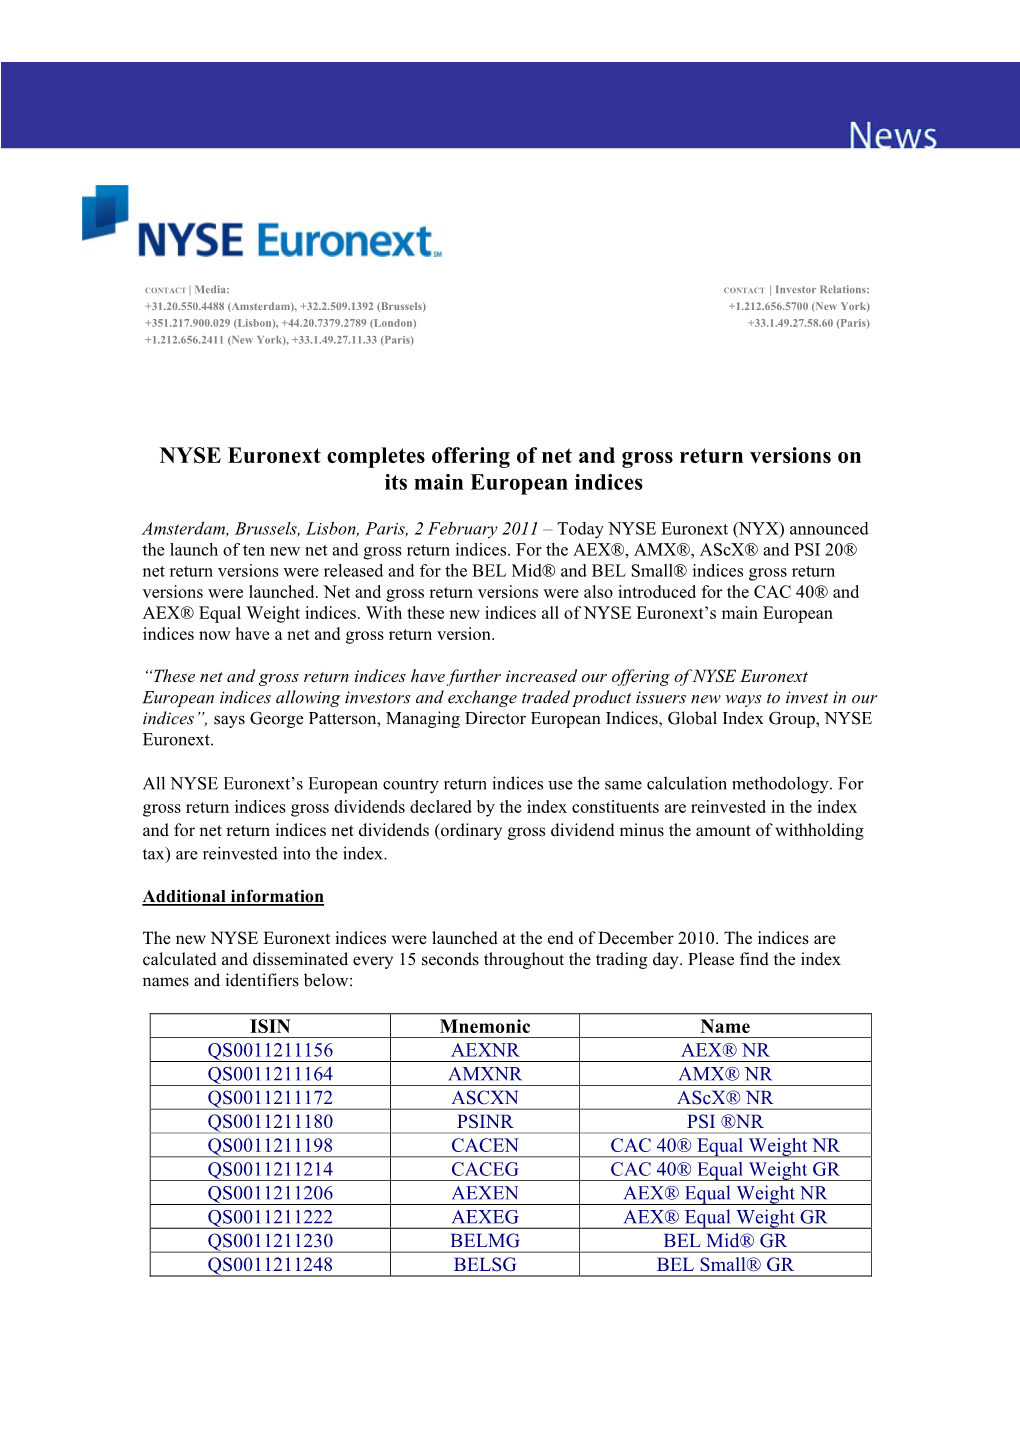 NYSE Euronext Completes Offering of Net and Gross Return Versions on Its Main European Indices